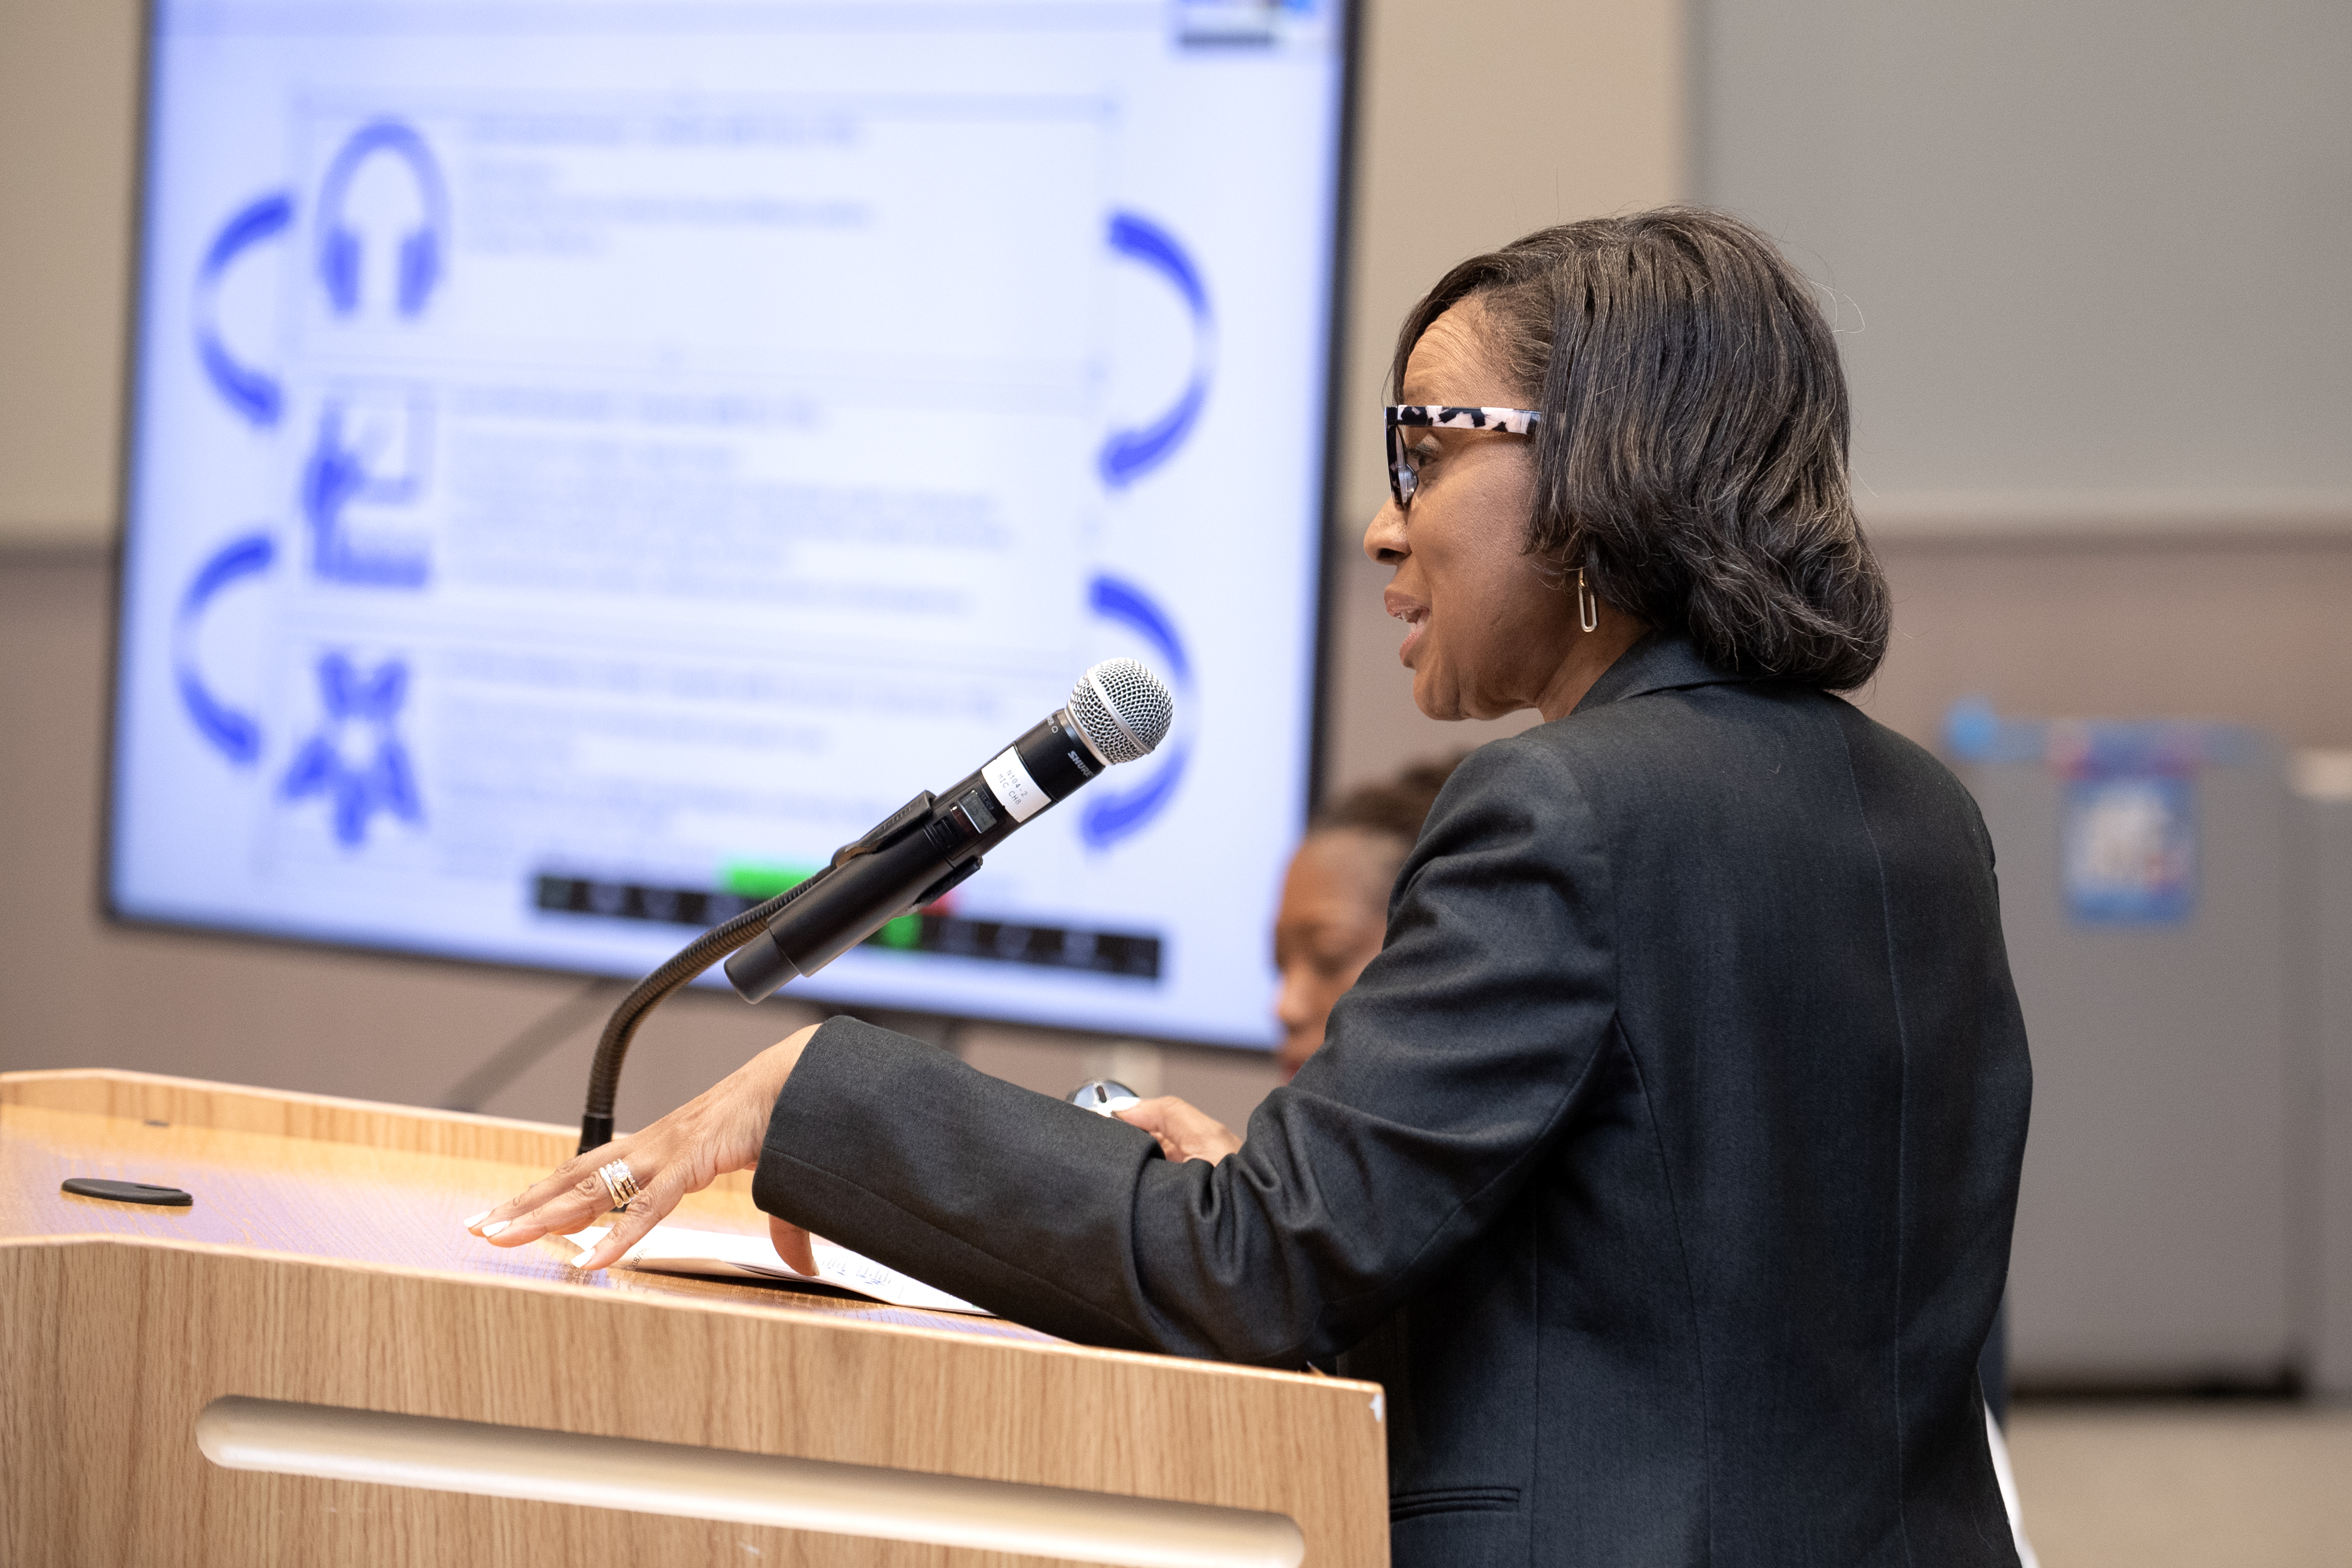 A woman presents with a PowerPoint screen next to her